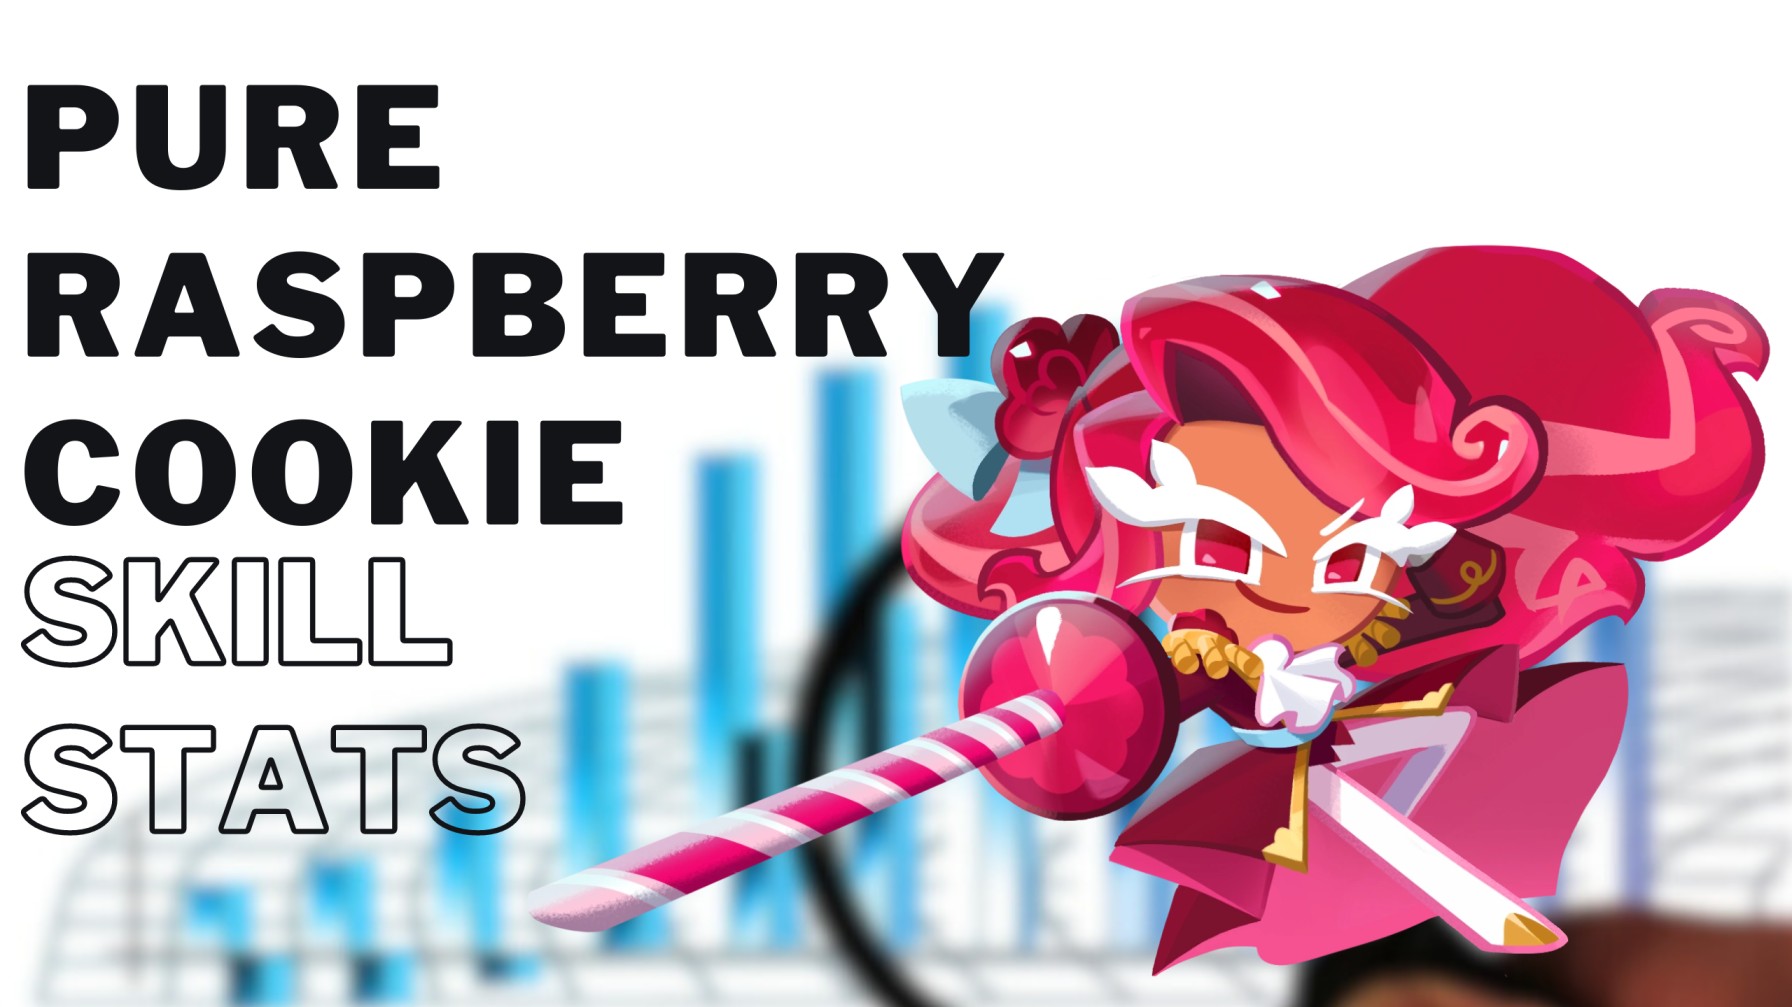 Pure Raspberry Cookie Skill Stats